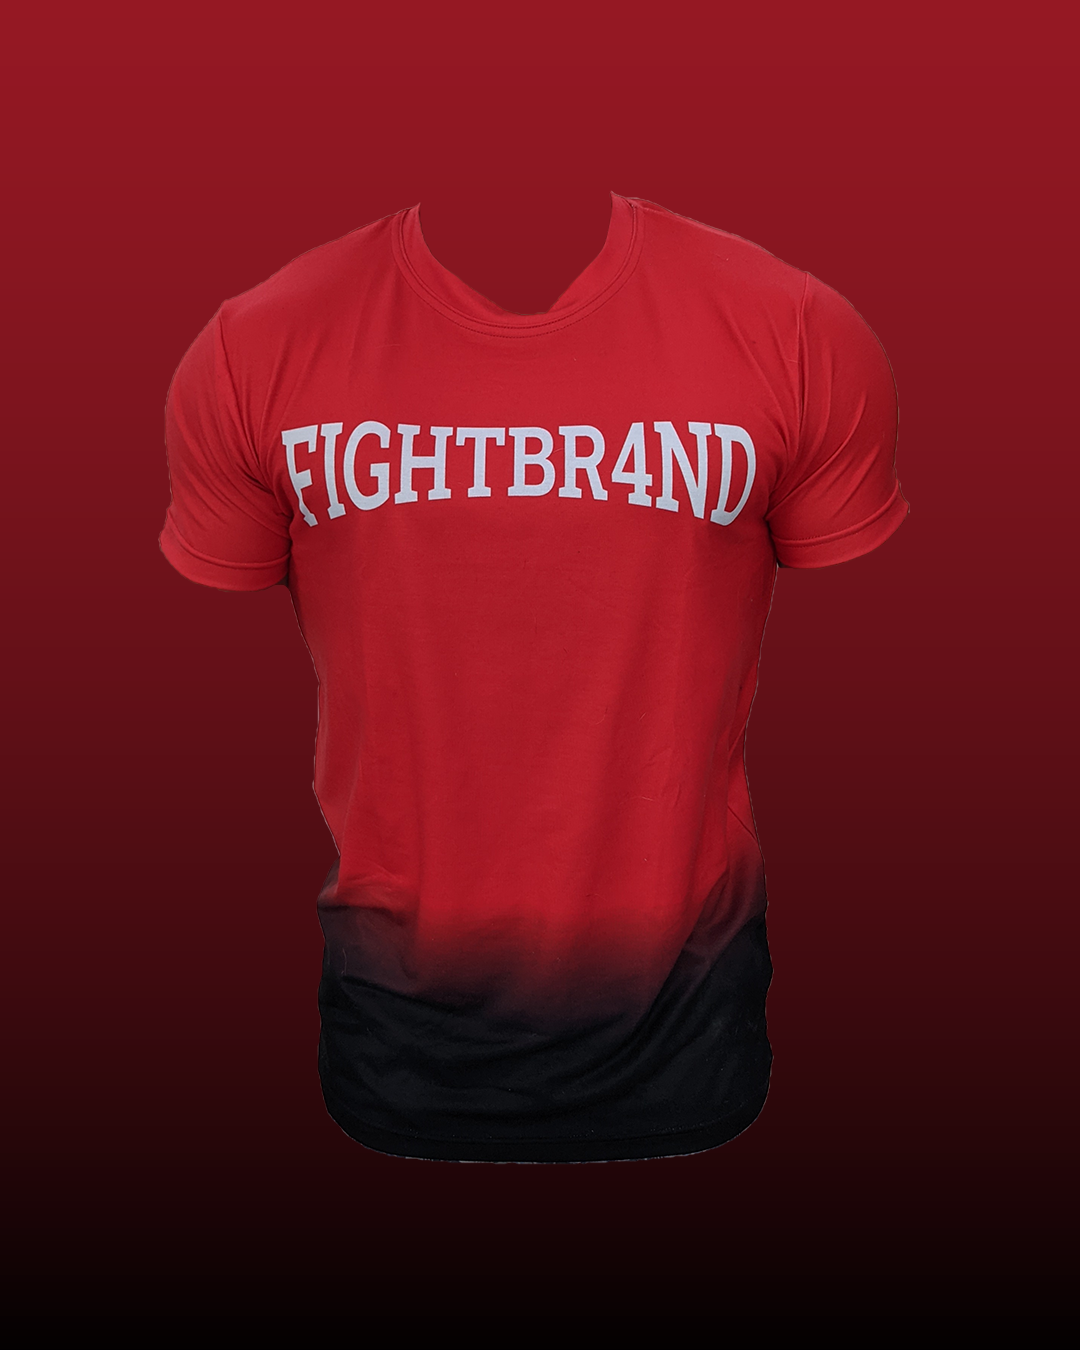 Red and black gradient cotton T-shirt